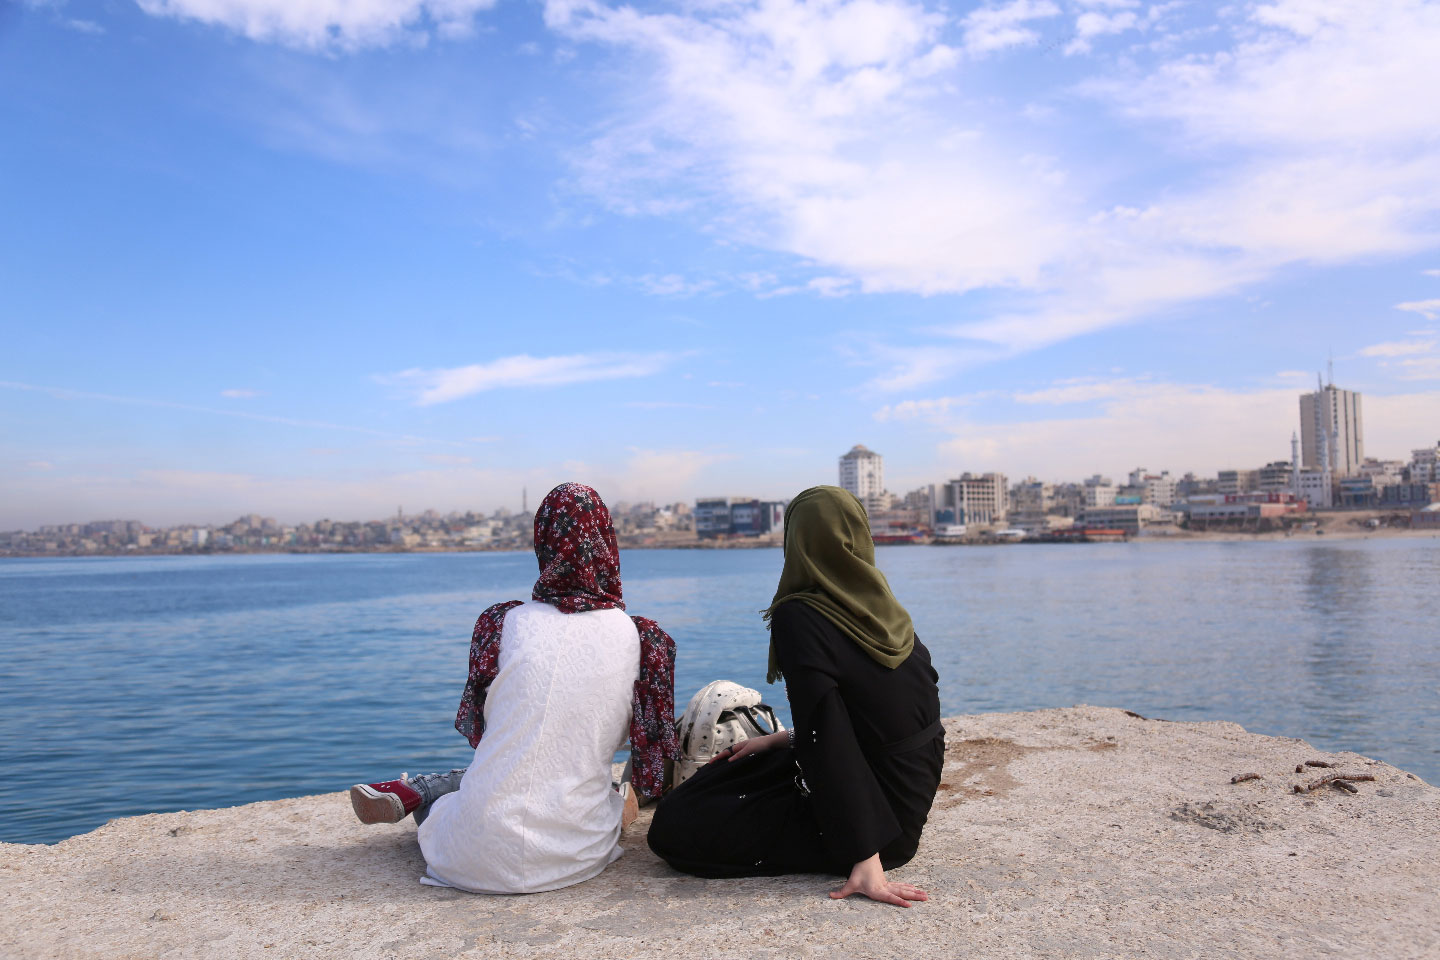 Palestinian Sara Abu Taqea (R), 23, who works in the maternity ward at Gaza's Al-Ahli hospital, and her friend spend time at the seaport in Gaza City, November 27, 2018.